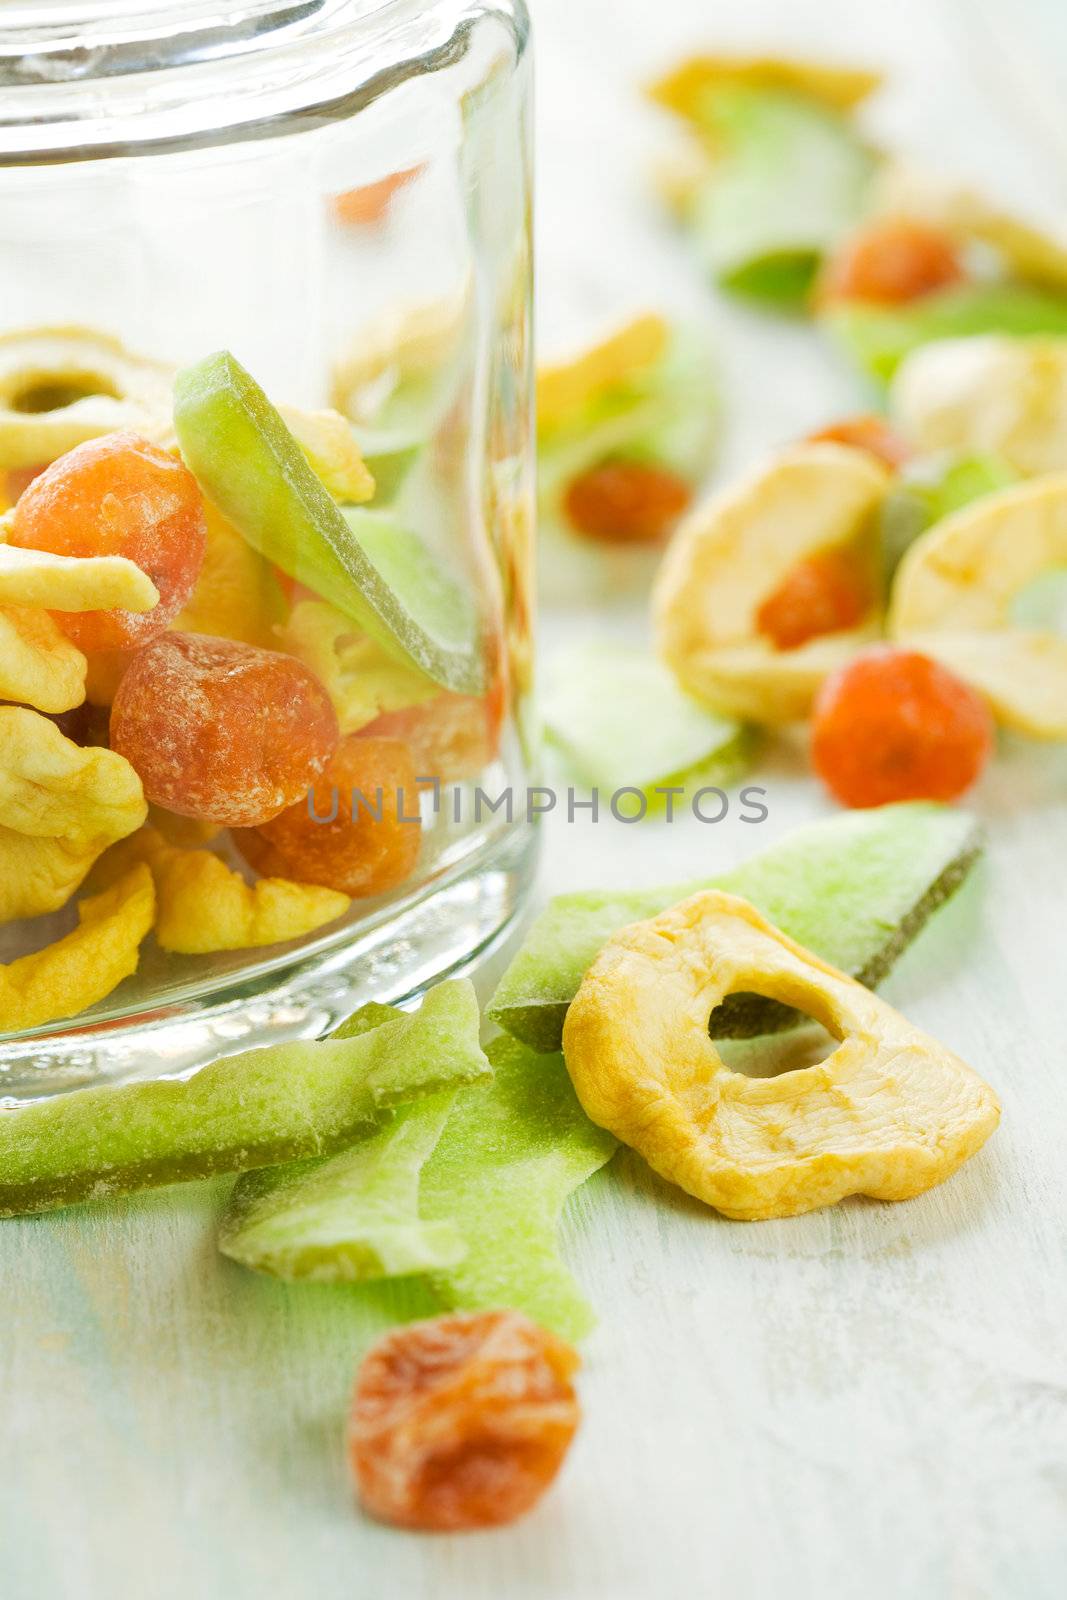 Assortment of sliced dried fruits in jar on table